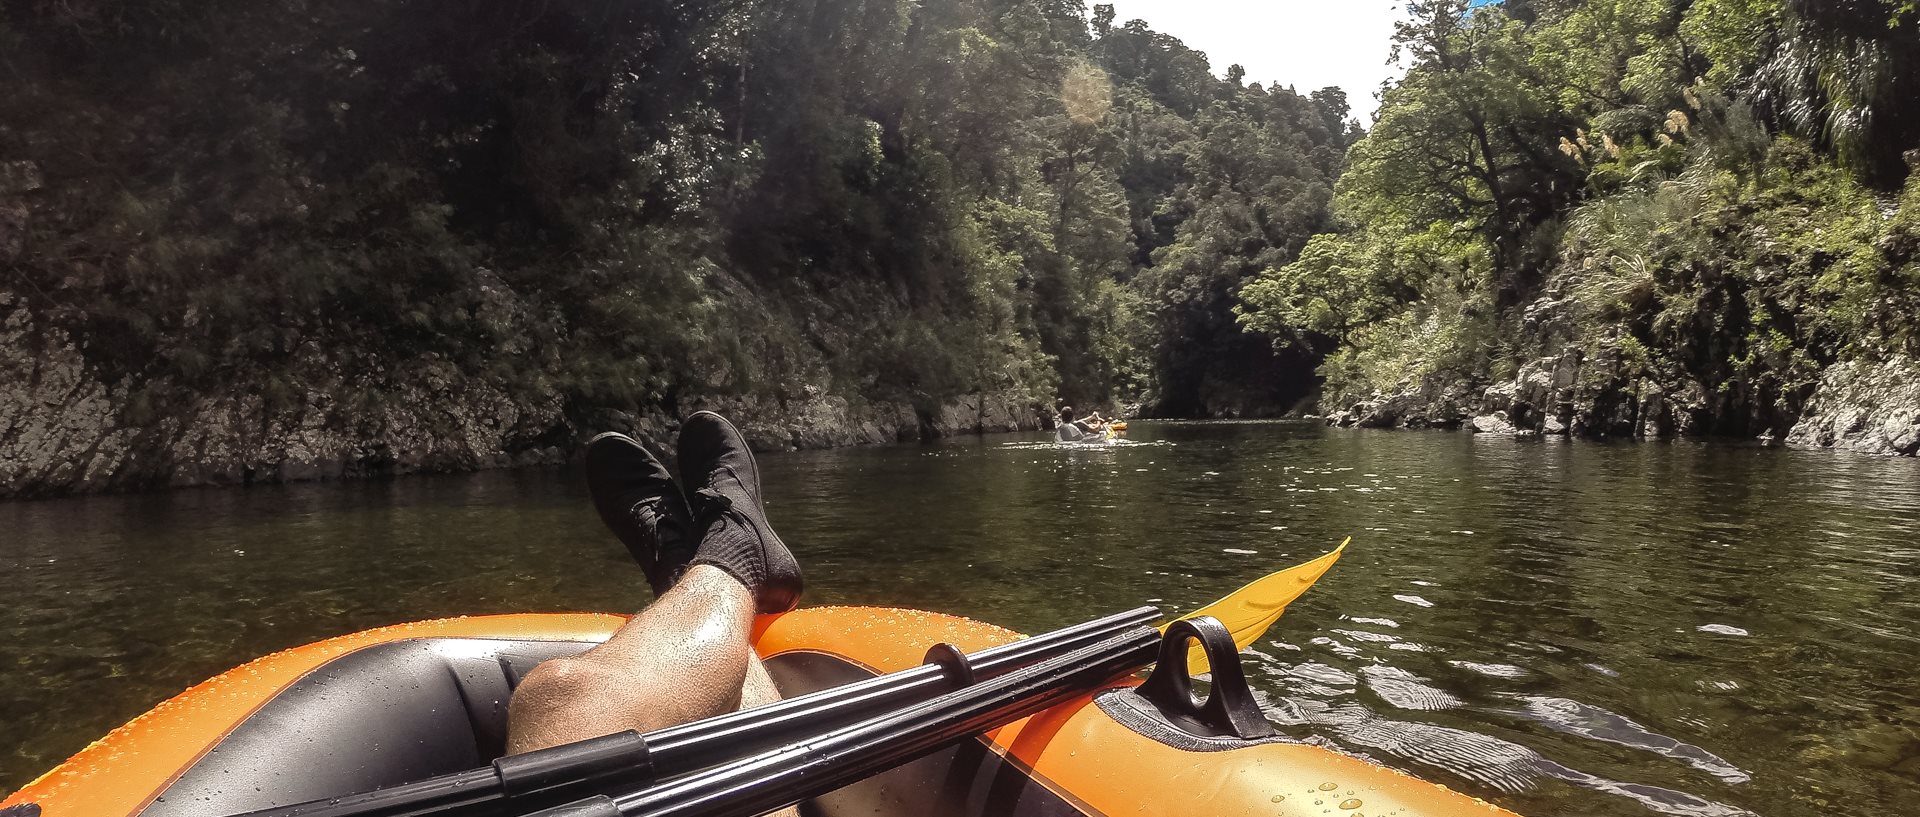 The Hutt River Experience